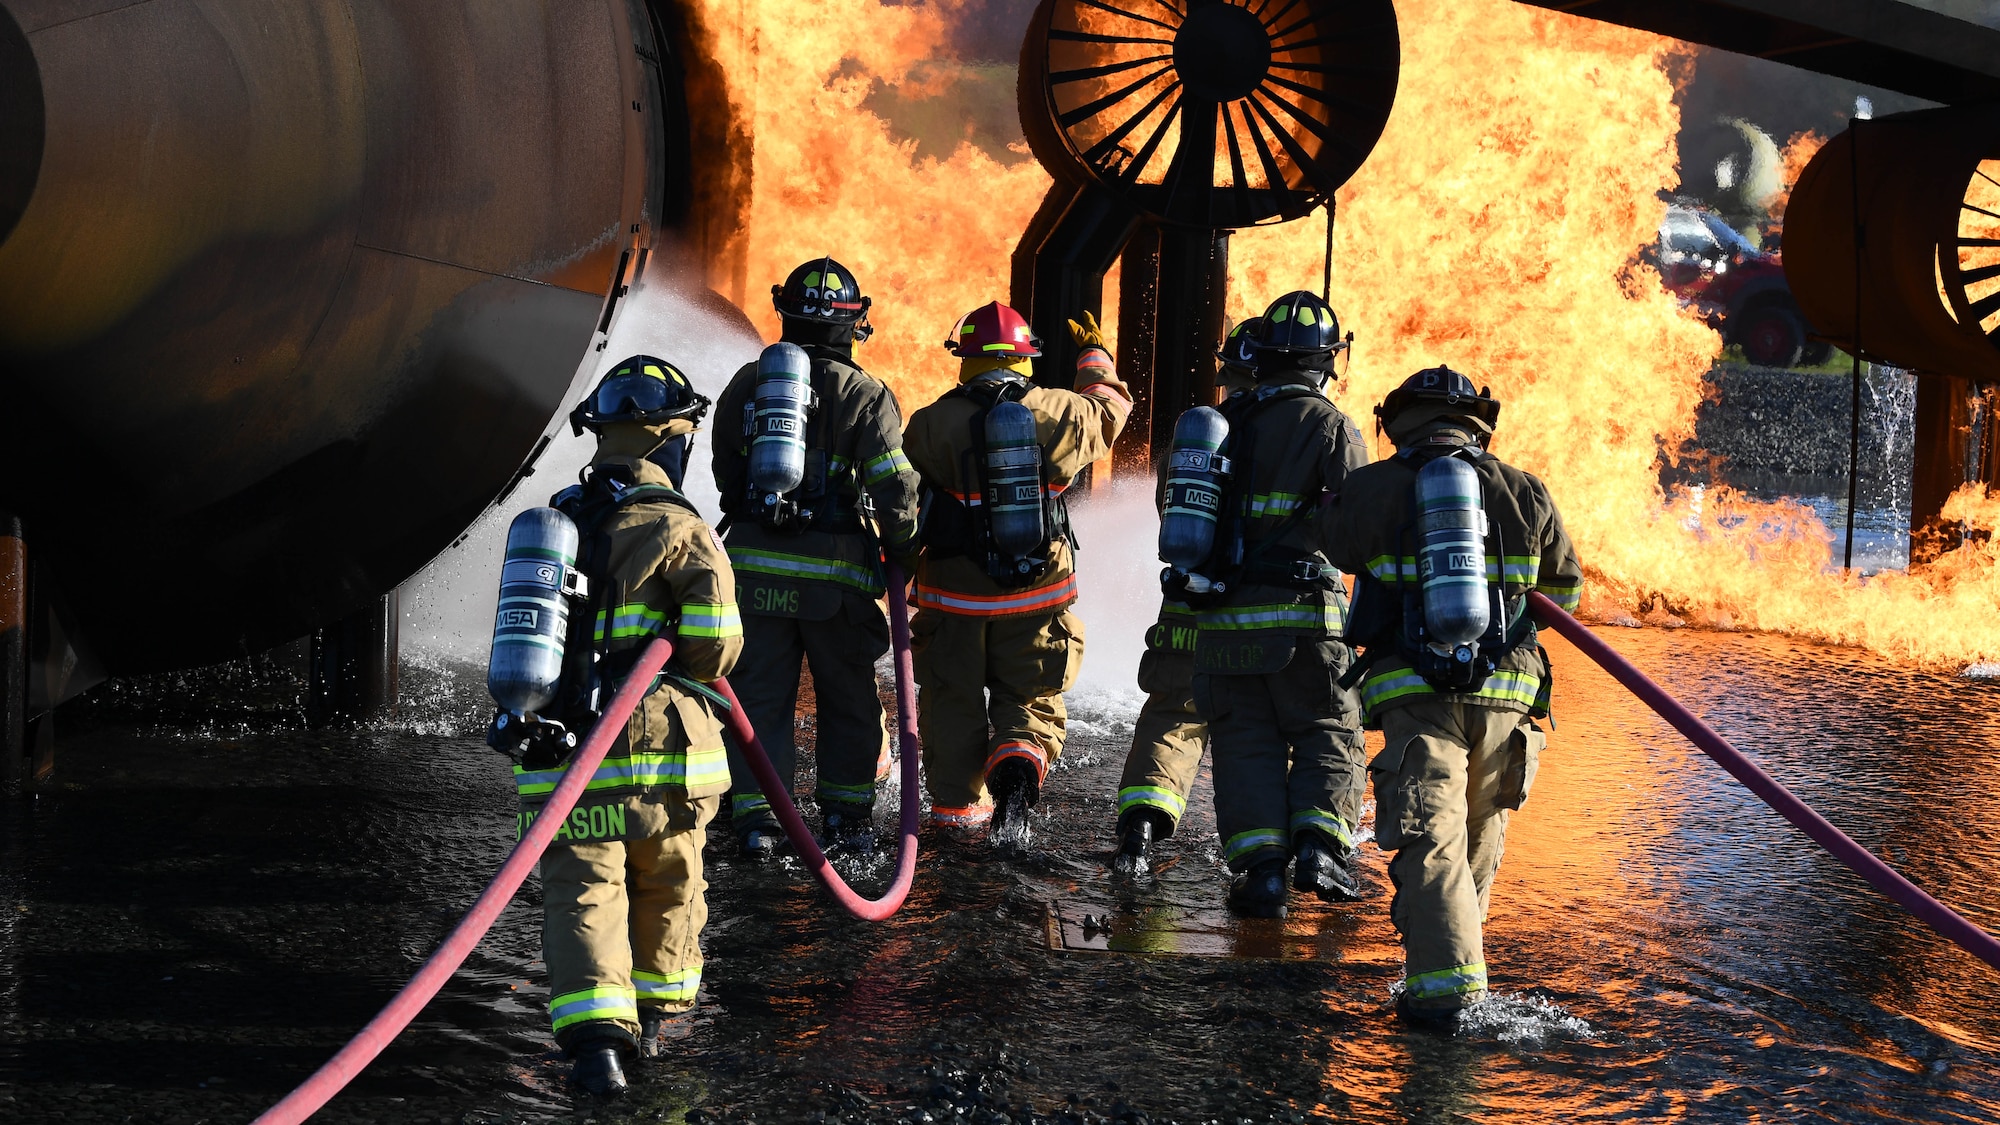 U.S. Air Force firefighters from the 2nd Civil Engineering Squadron and firefighters from the Shreveport Fire Department put out a simulated aircraft fire March 21, 2019, at Barksdale Air Force Base, Louisiana. The firefighters simulated spraying a foam blanket over the fire, to remove oxygen from the flames and put out the fire. (U.S. Air Force photo by Airman Jacob B. Wrightsman)